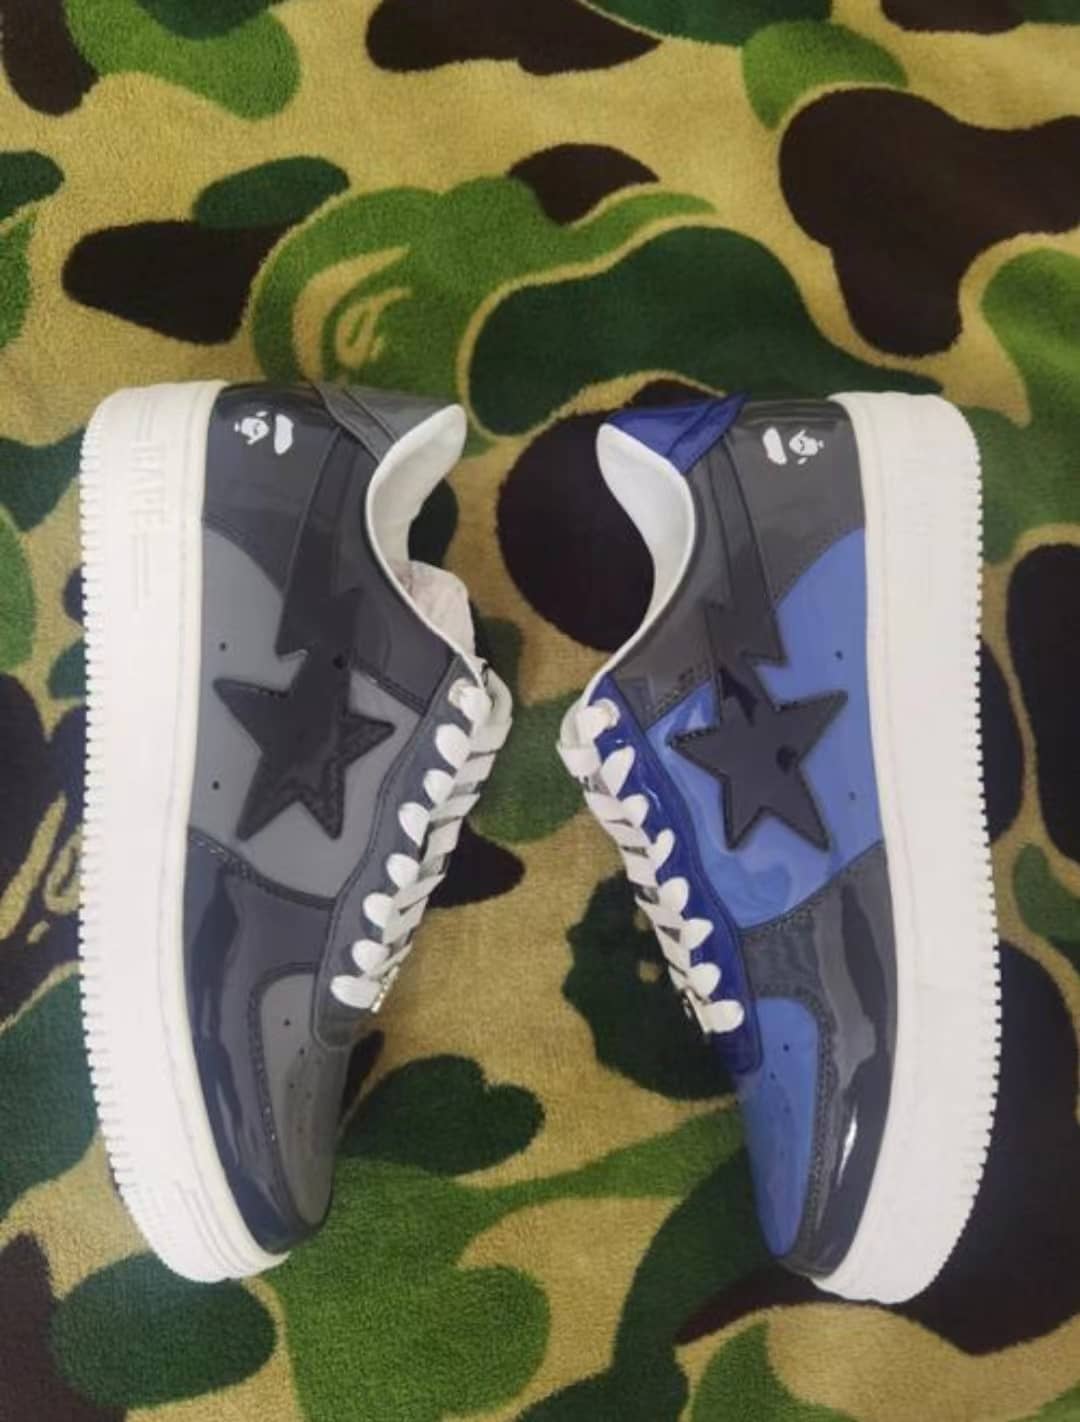 Bape Sta Navy Color Combo Reps: Classic Aesthetics with a Modern Twist